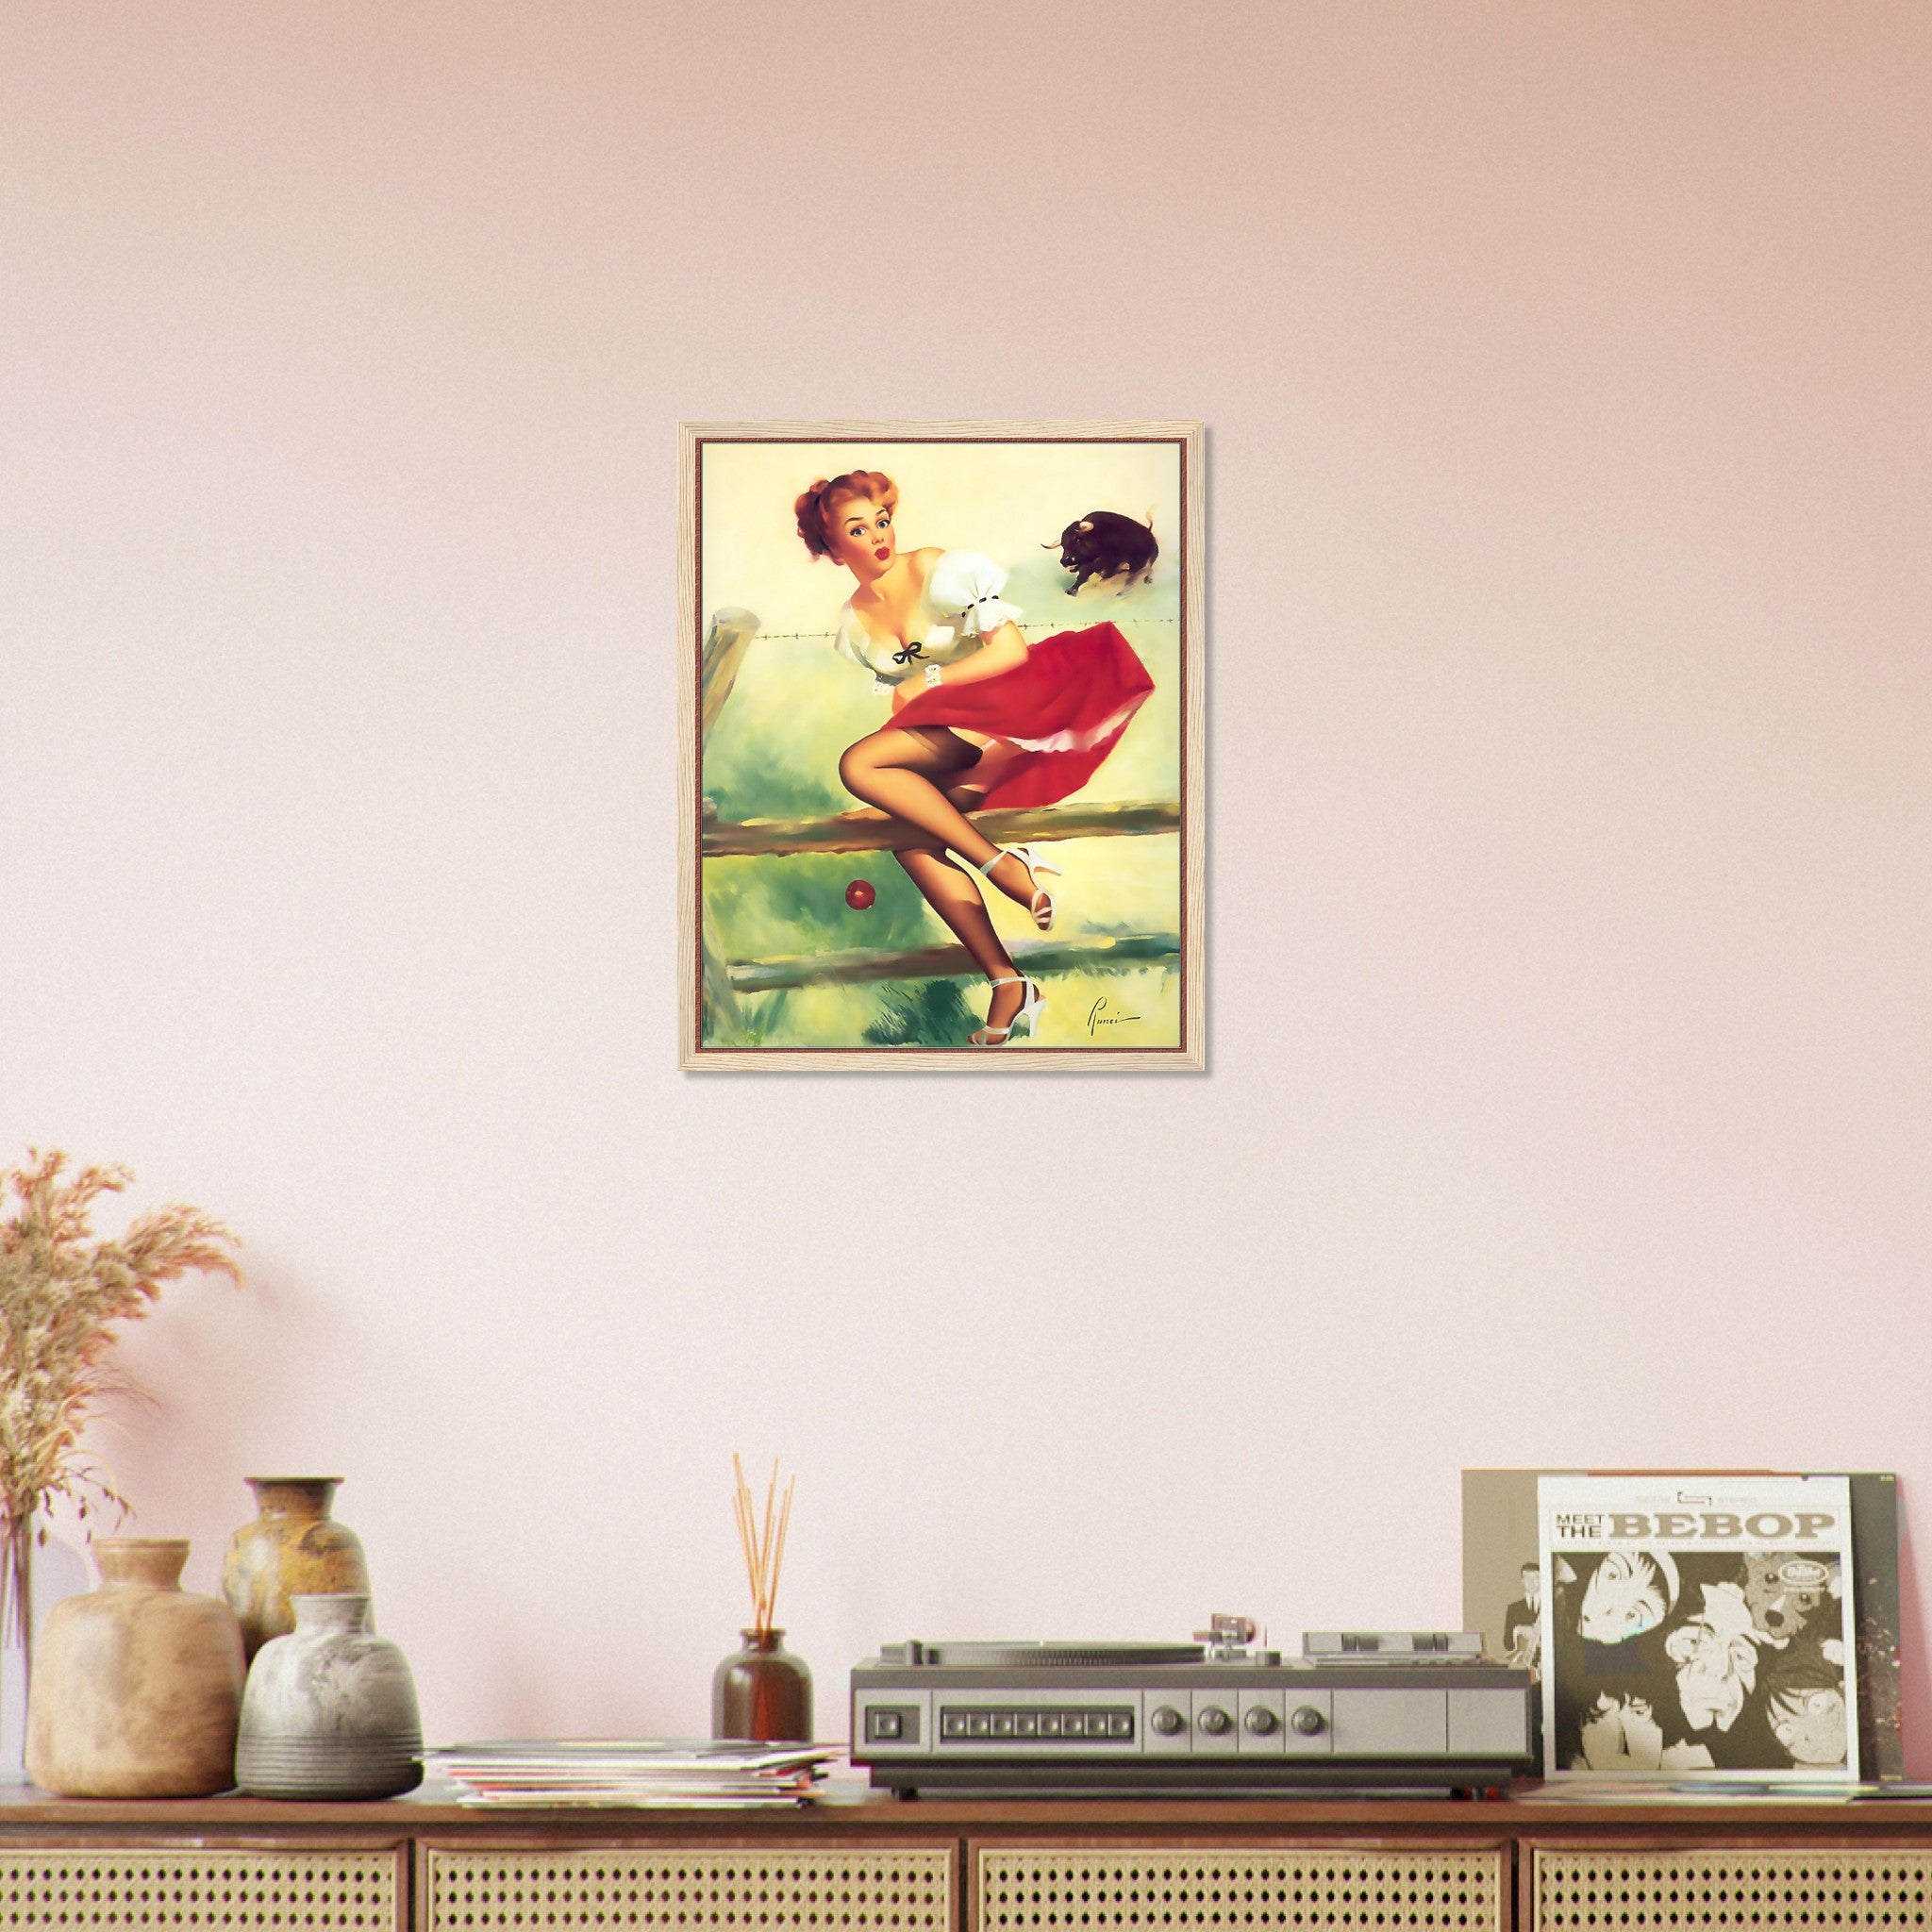 Pin Up Girl Framed, Vintage Pin Up  - The Escape - Retro Pin Up Girl Framed Print-  Edward Runci,  - Late 1940'S - 1950'S